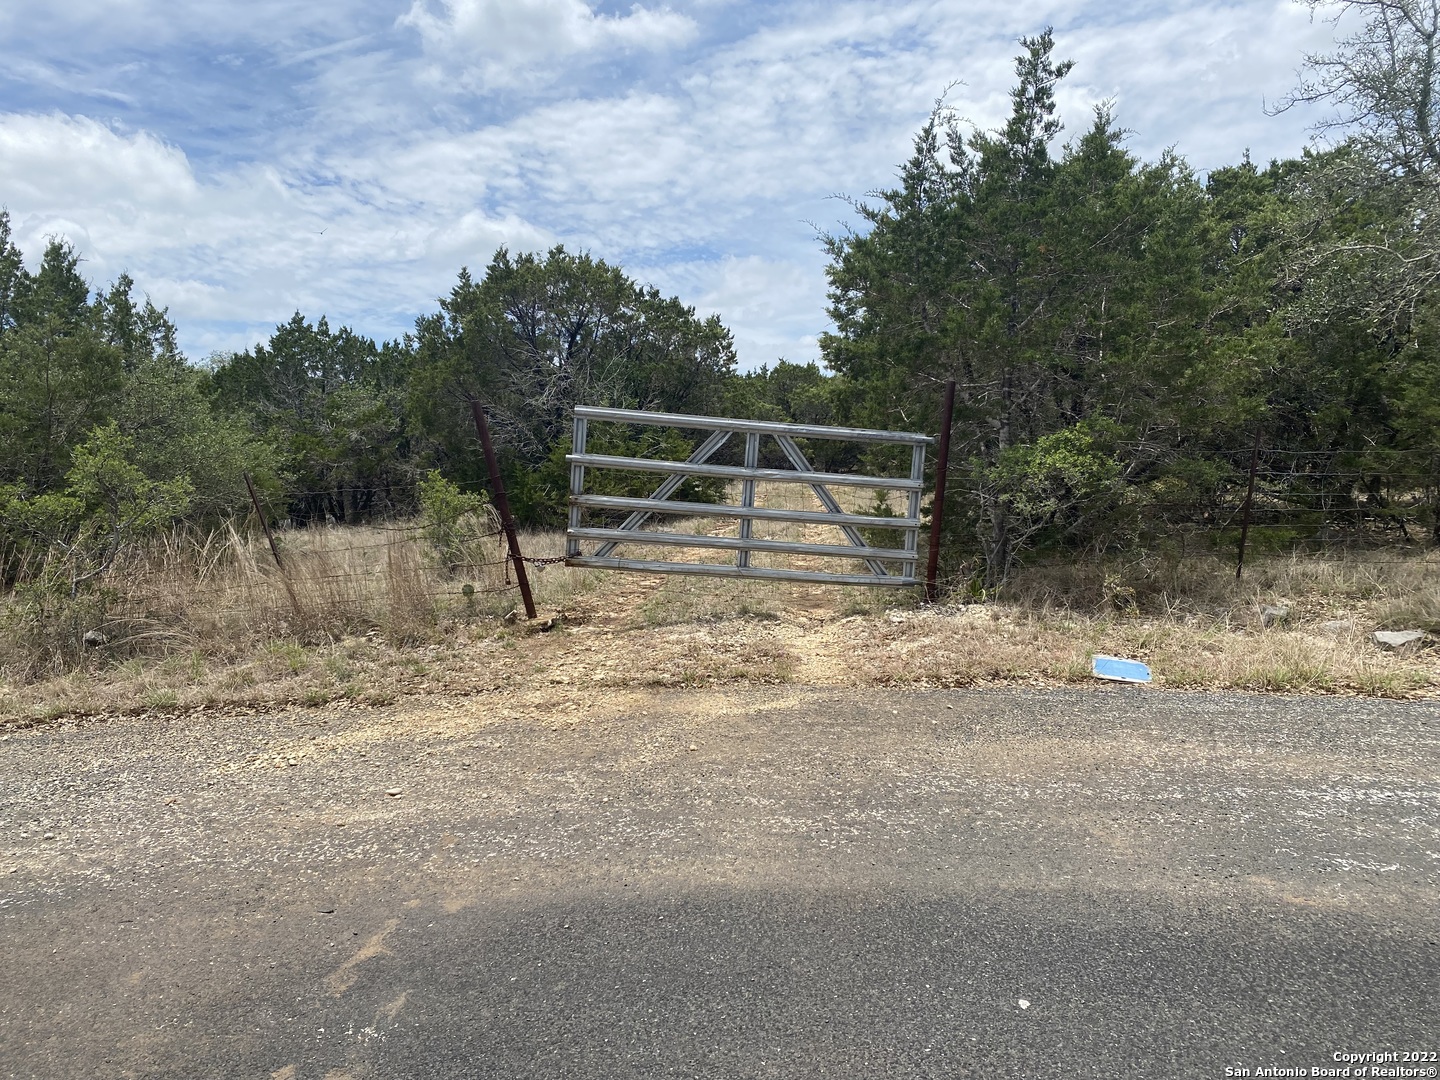 Great Opportunity to find FIFTEEN ACRES of undeveloped land just minutes from 1604 and Blanco. (The Blanco/1604 intersection is approximately 5.3 miles away.) This property can be accessed through a locked gate in the Zenia Lane Cul-De-Sac.